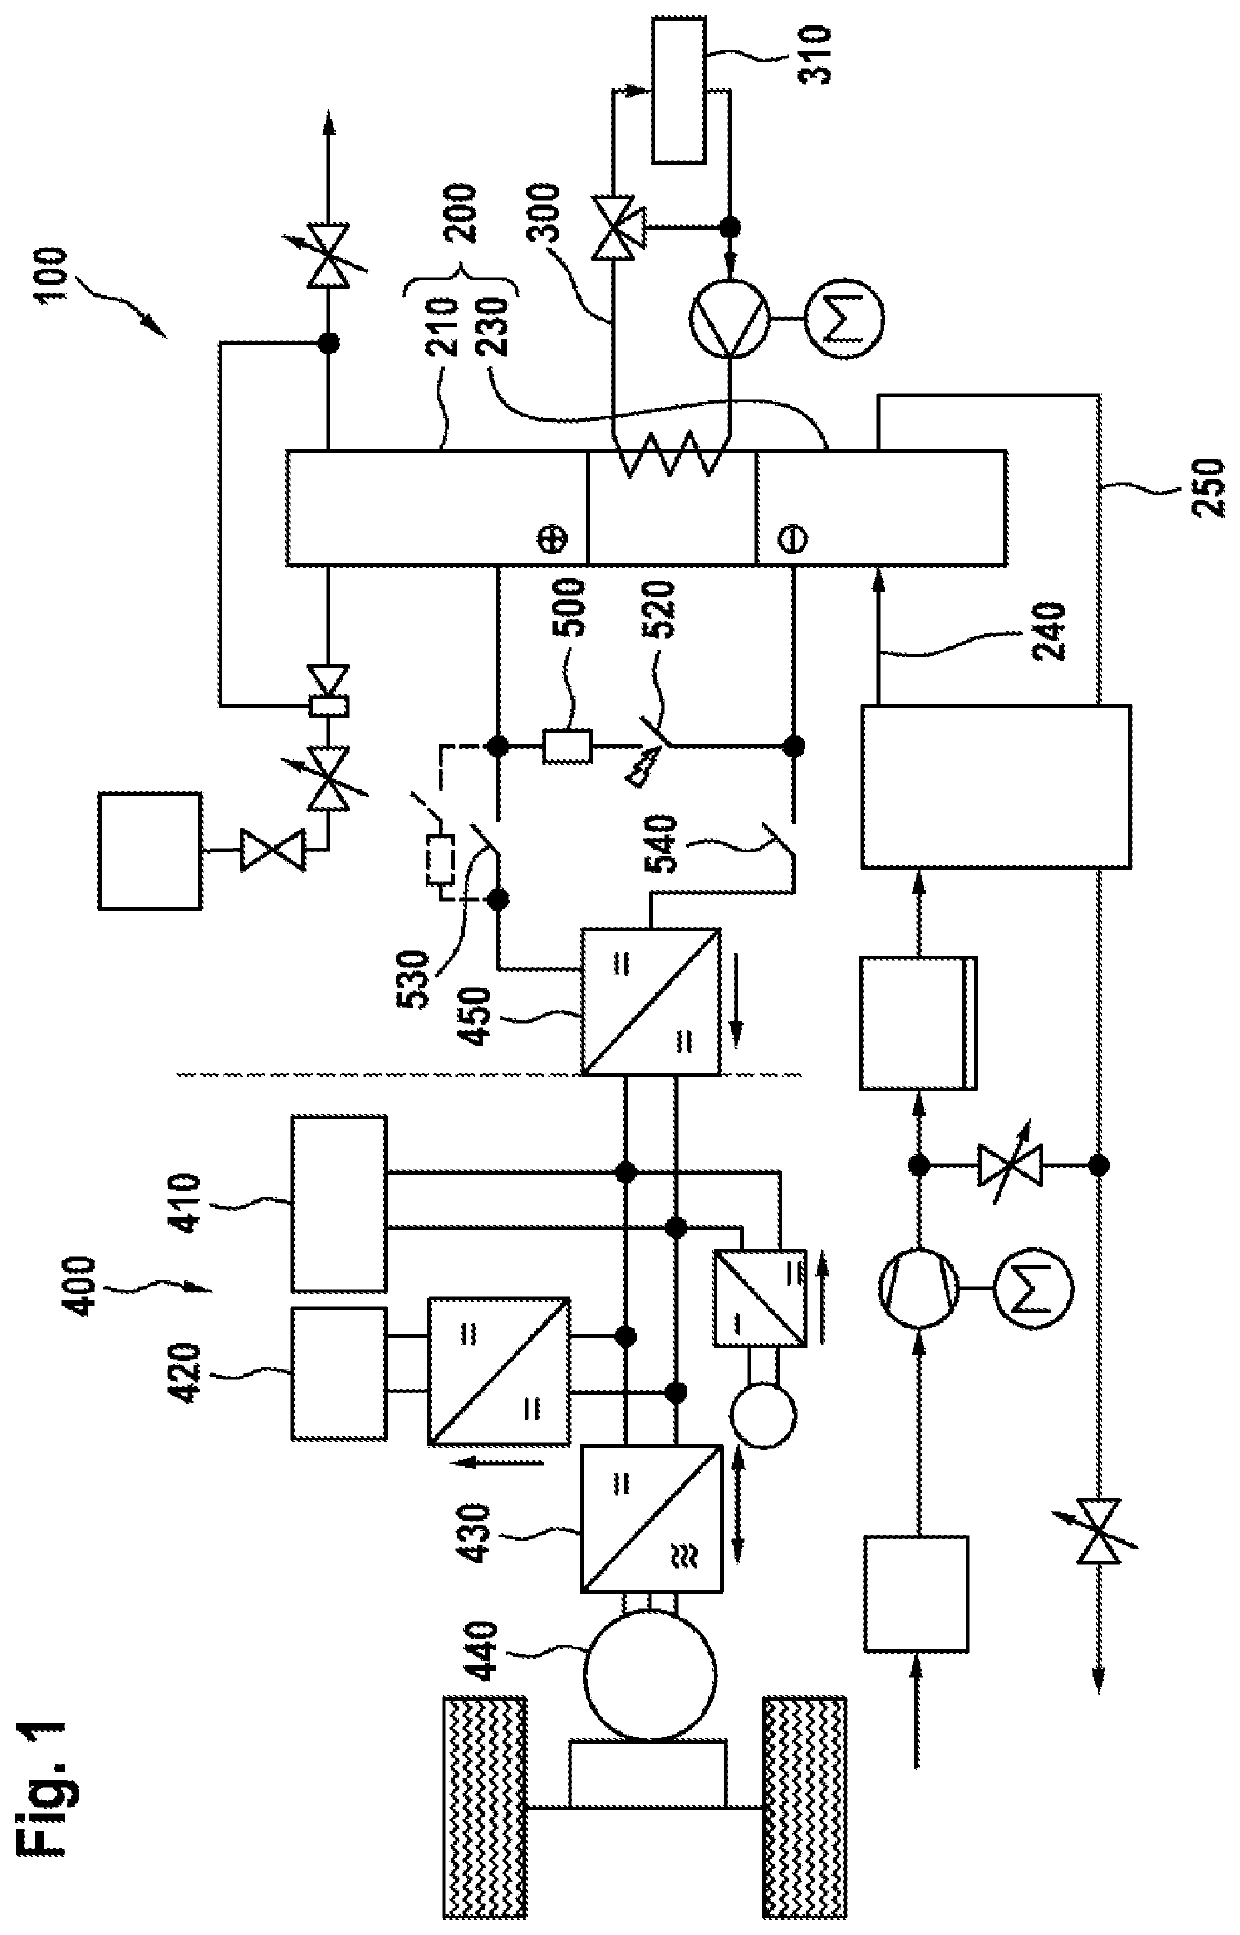 Intrinsically safe bleed-down circuit and control strategy for fuel cell systems